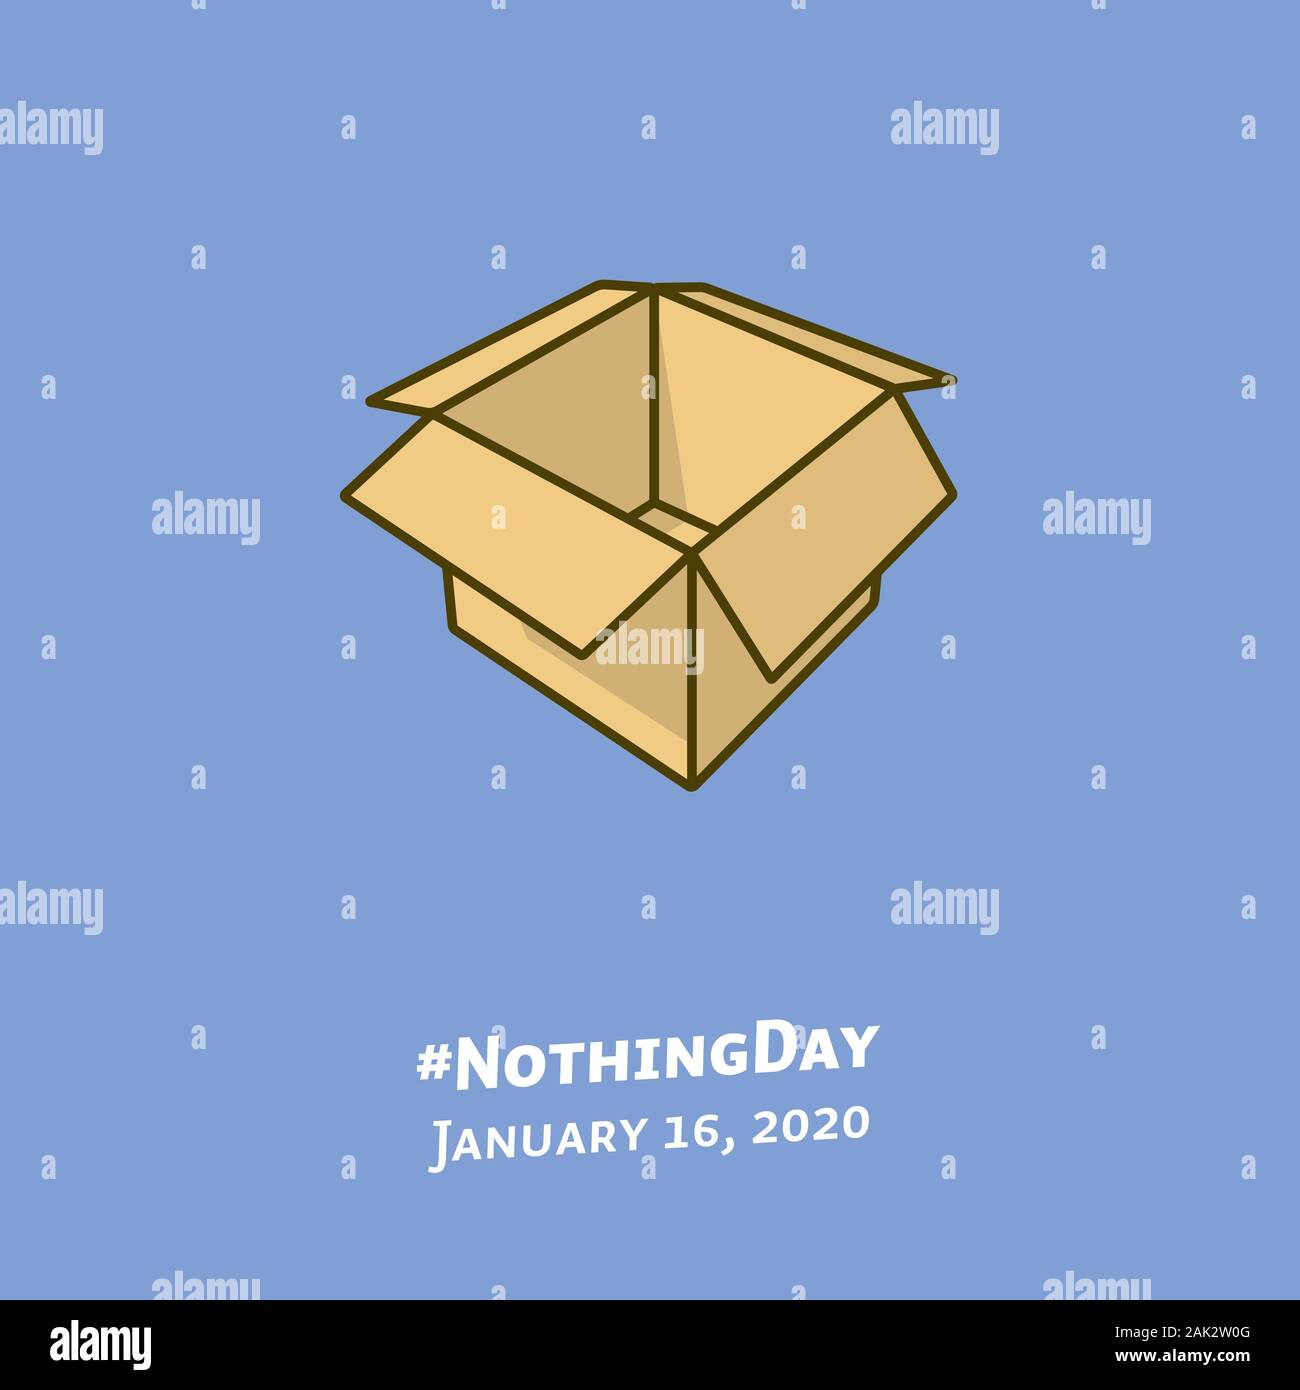 Empty cardboard box illustration for #NothingDay on January 16. Emptiness color vector symbol. Stock Vector